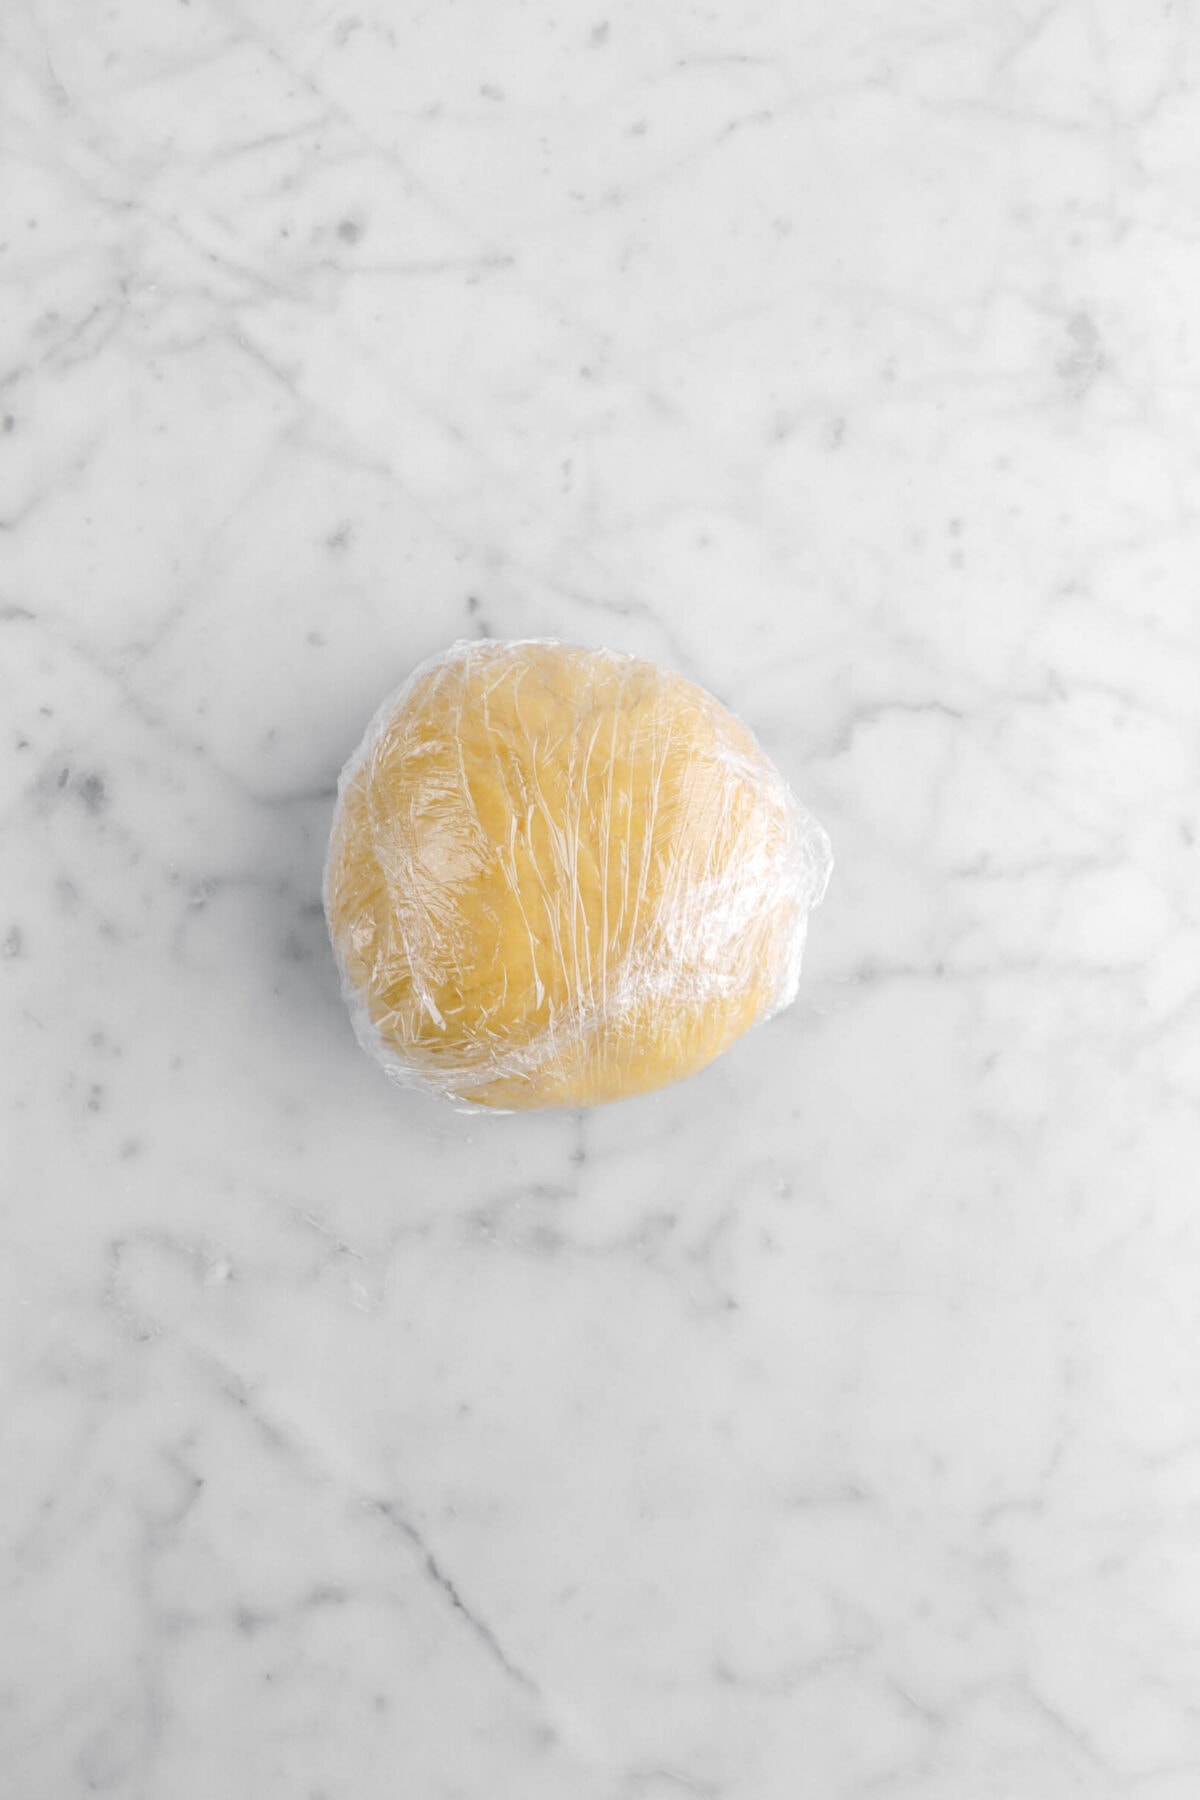 pasta dough wrapped in plastic wrap on marble surface.